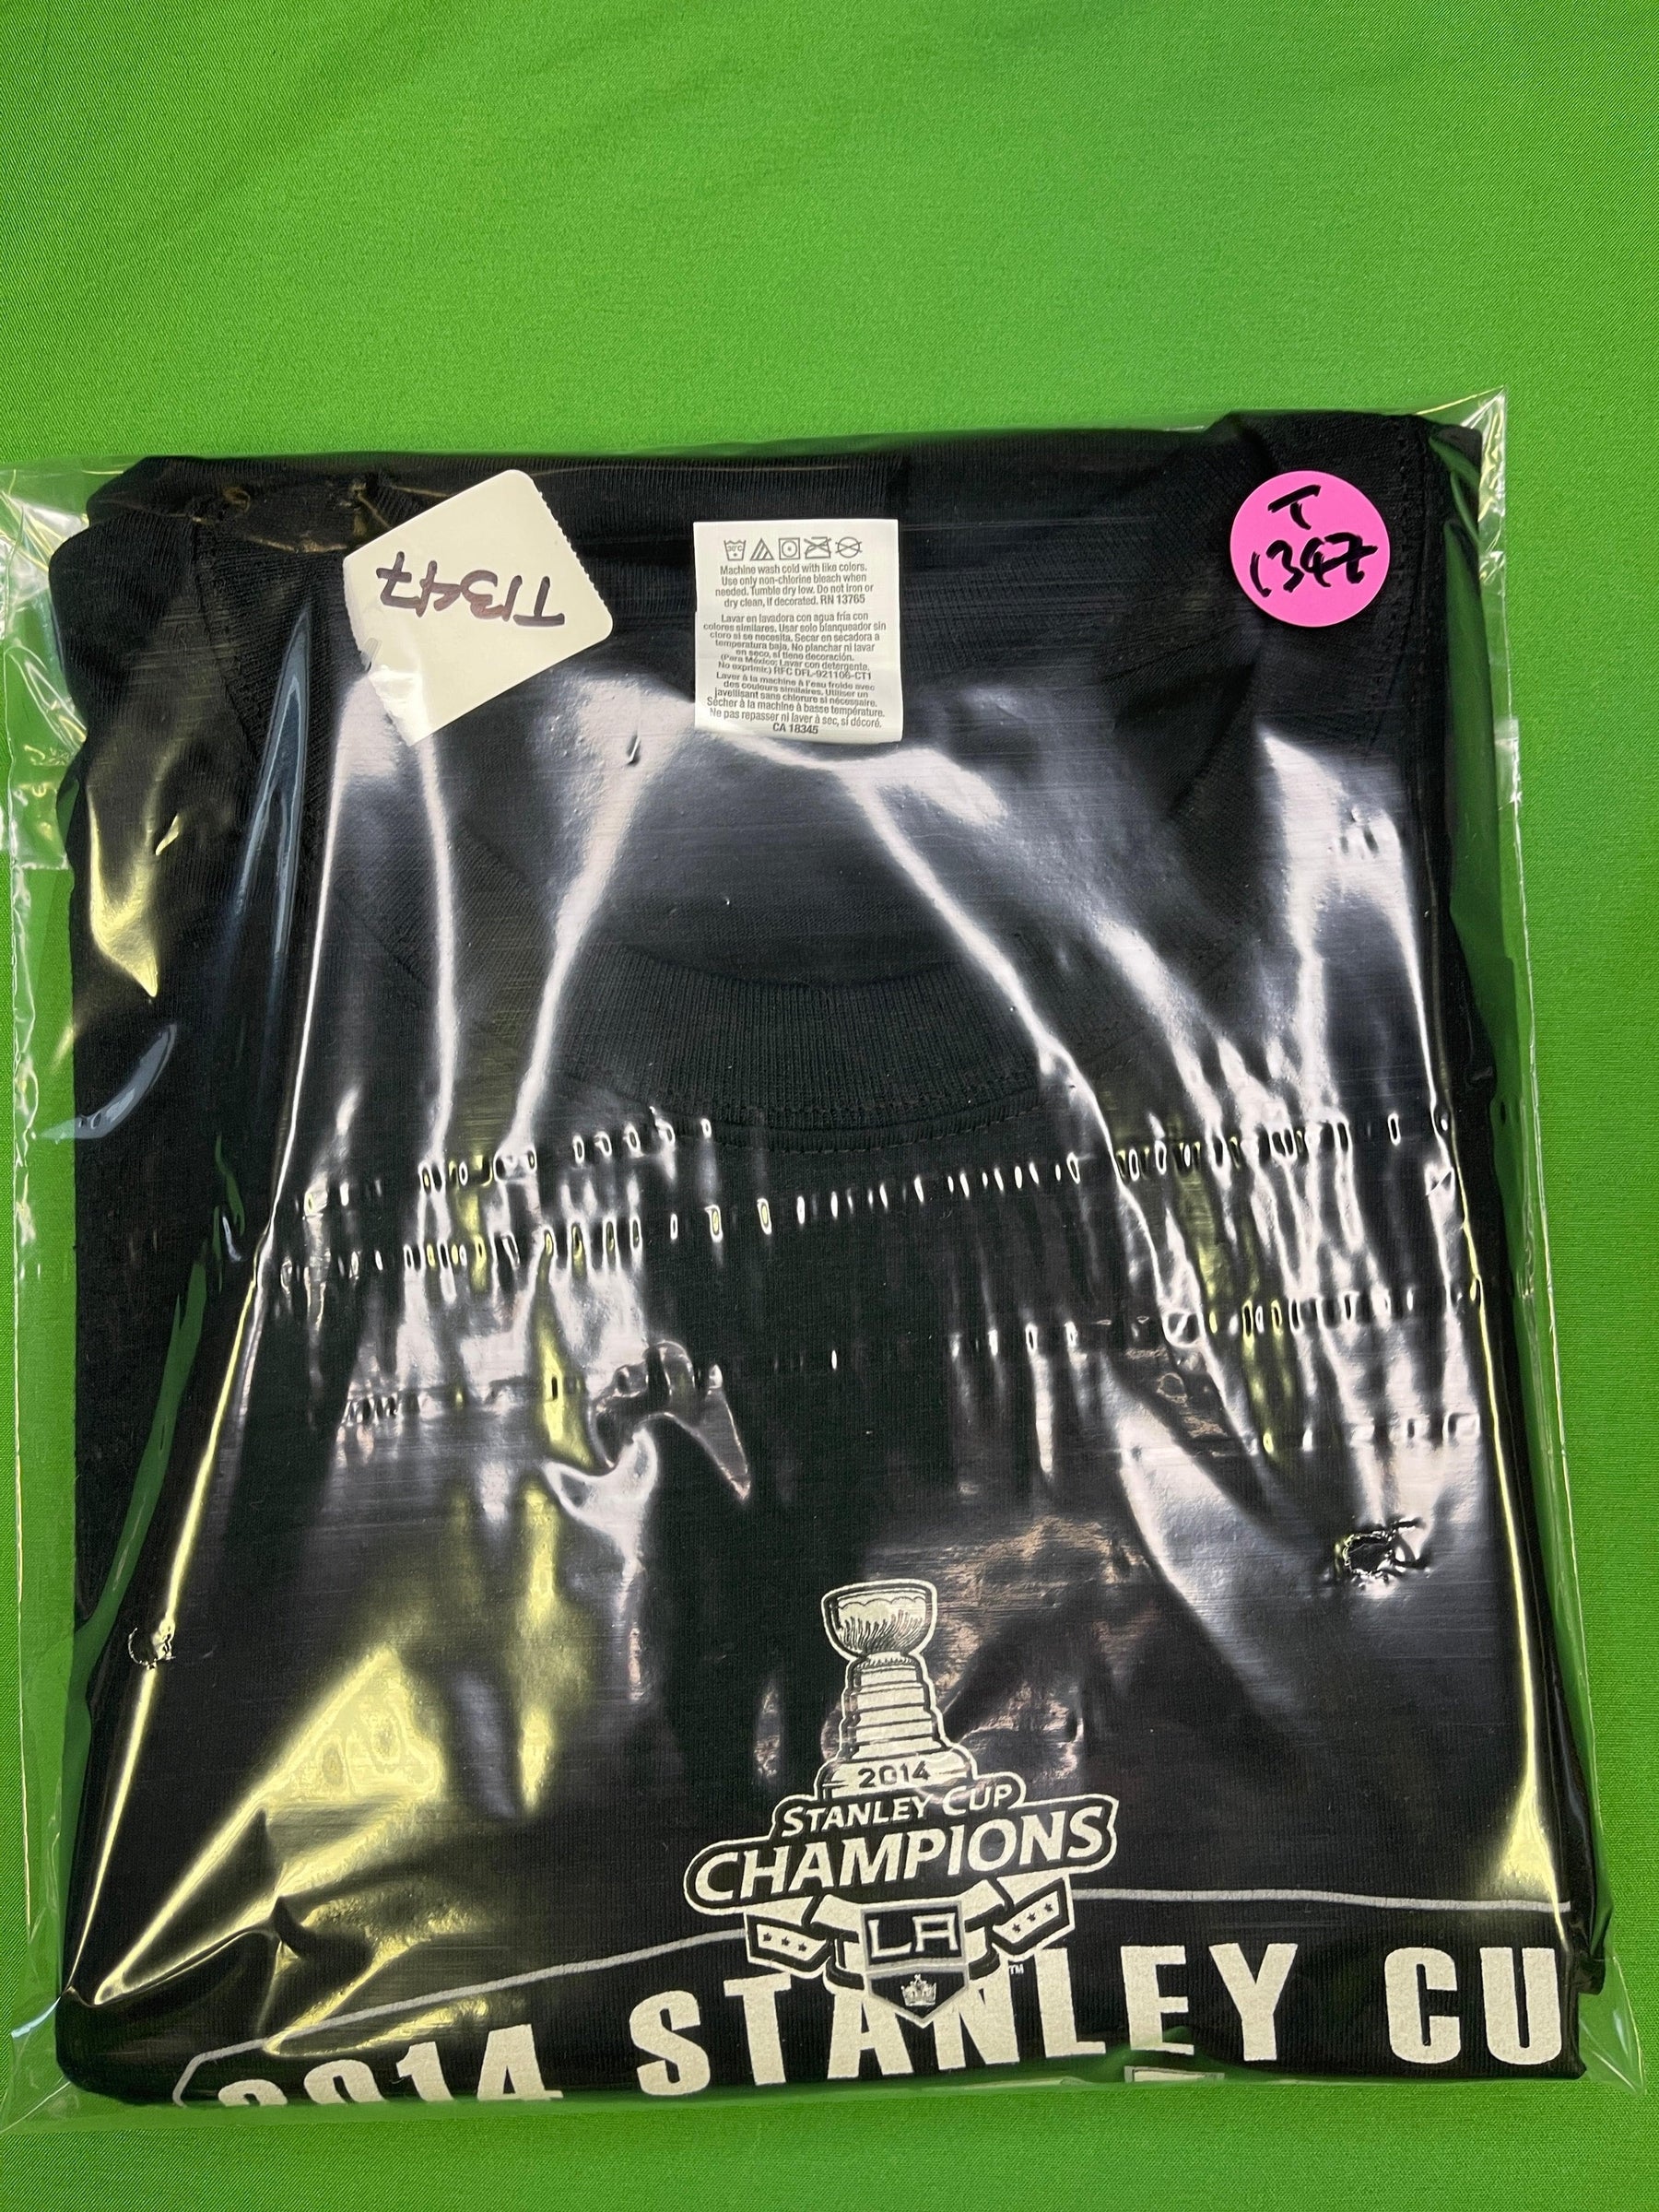 NHL Los Angeles Kings 2014 Stanley Cup Champions T-Shirt Men's Large NWT